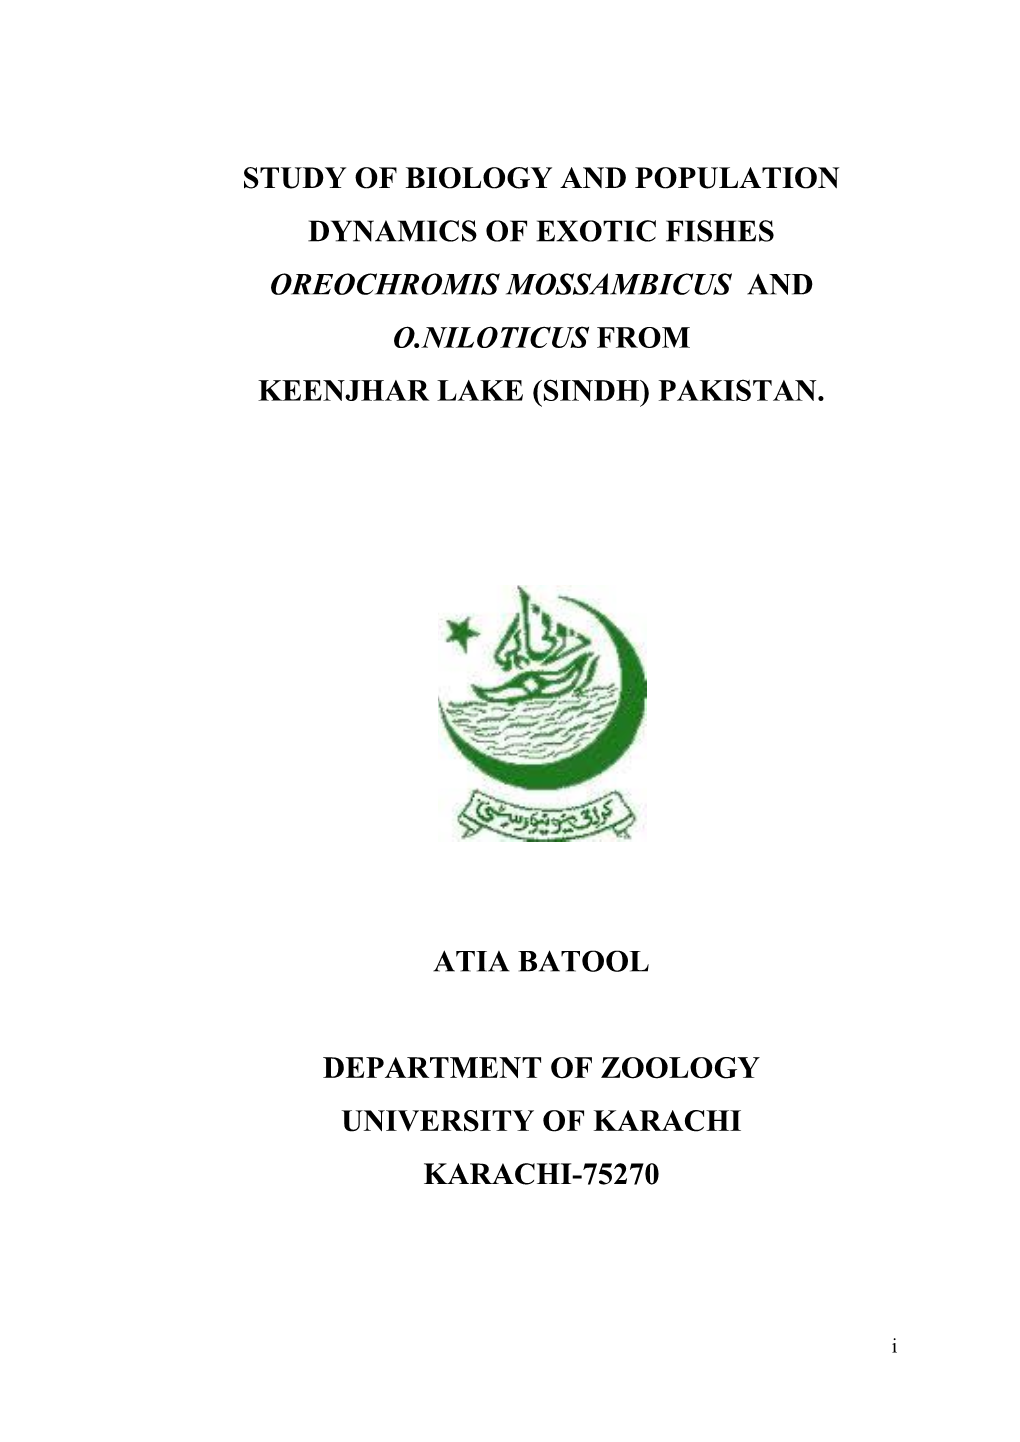 Study of Biology and Population Dynamics of Exotic Fishes Oreochromis Mossambicus and O.Niloticus from Keenjhar Lake (Sindh) Pakistan